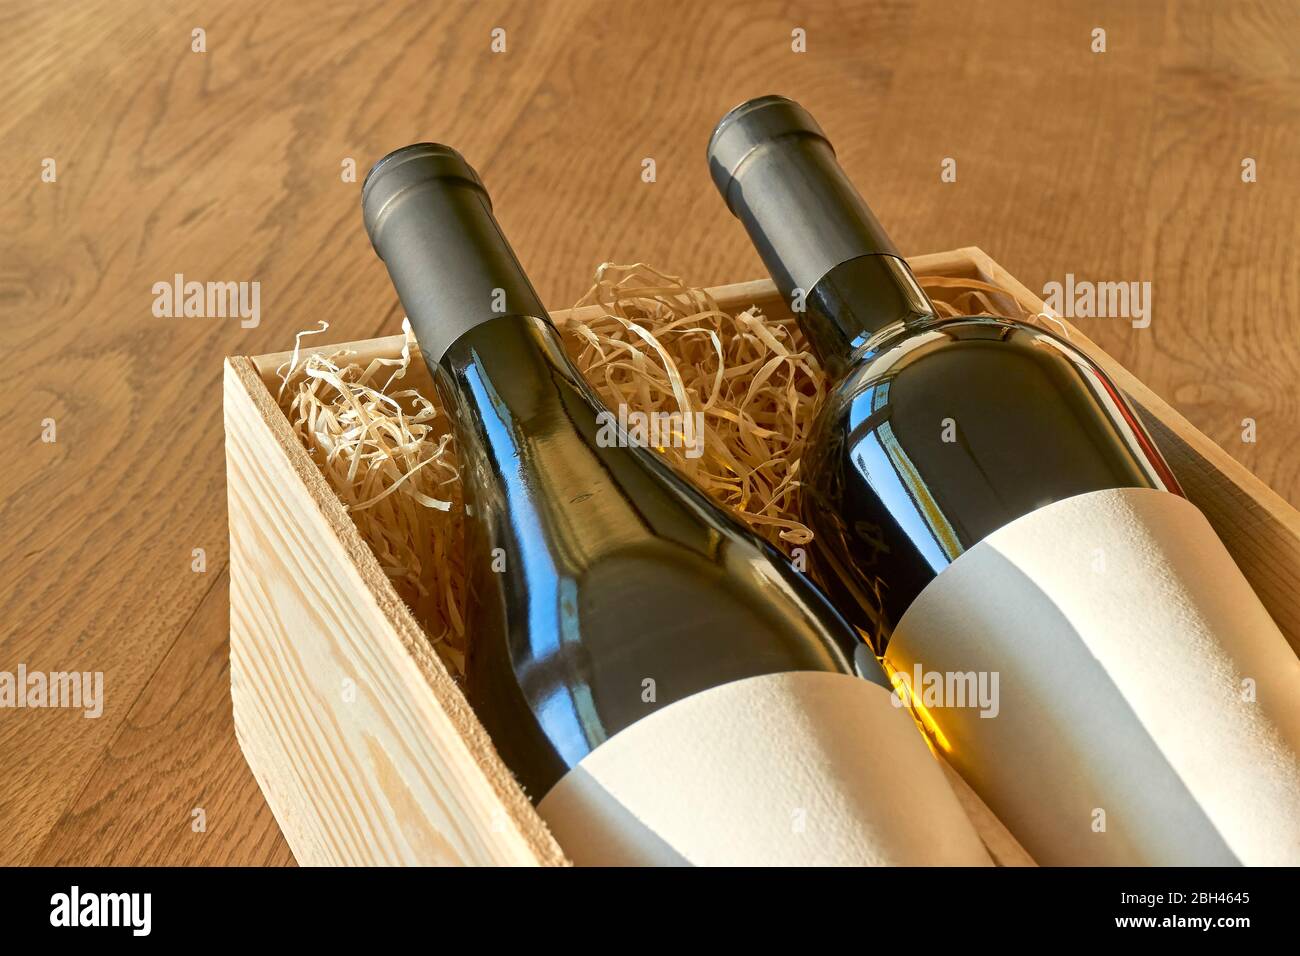 Download Bottles Of Red And White Wine In Wooden Gift Box With Straw Glass Bottles With Blank Labels For Use As Mockup Or Template Stock Photo Alamy